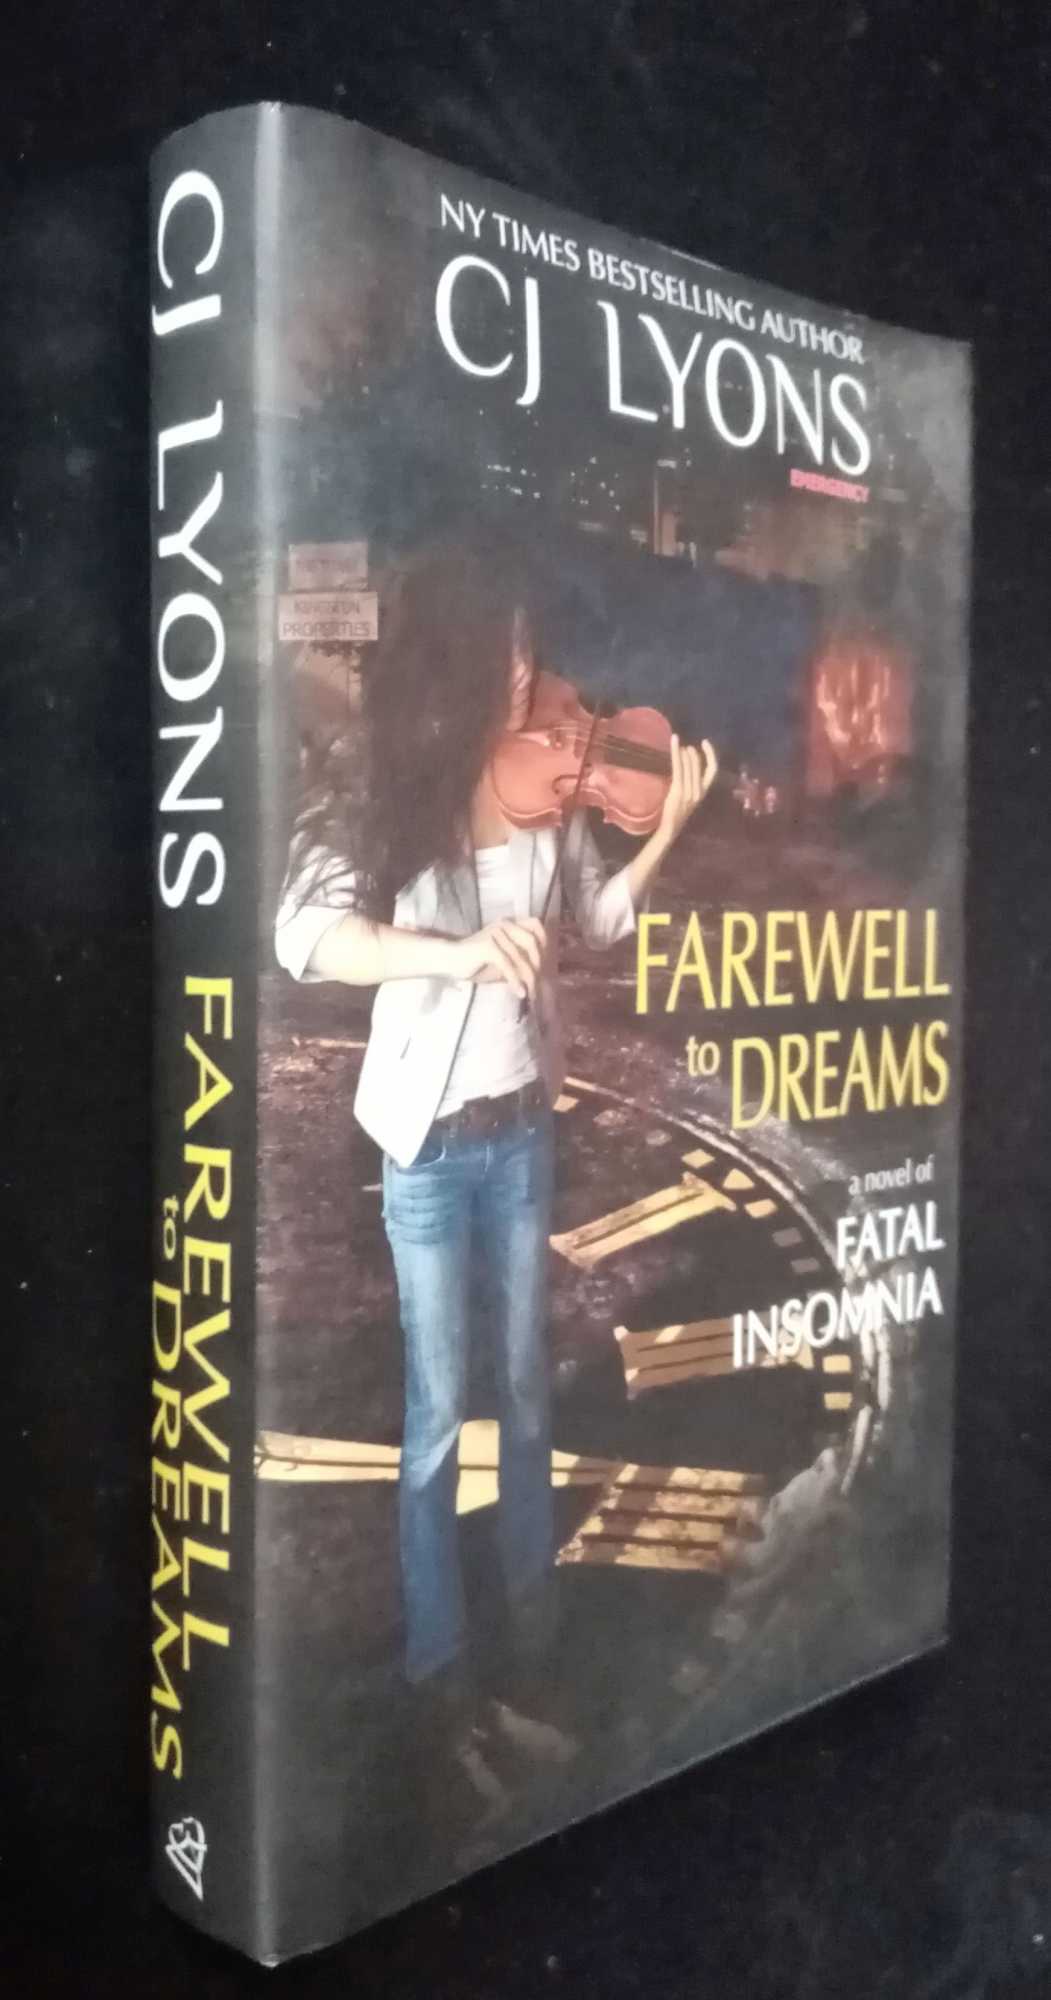 CJ Lyons - Farewell To Dreams: a Novel of Fatal Insomnia  SIGNED/Inscribed